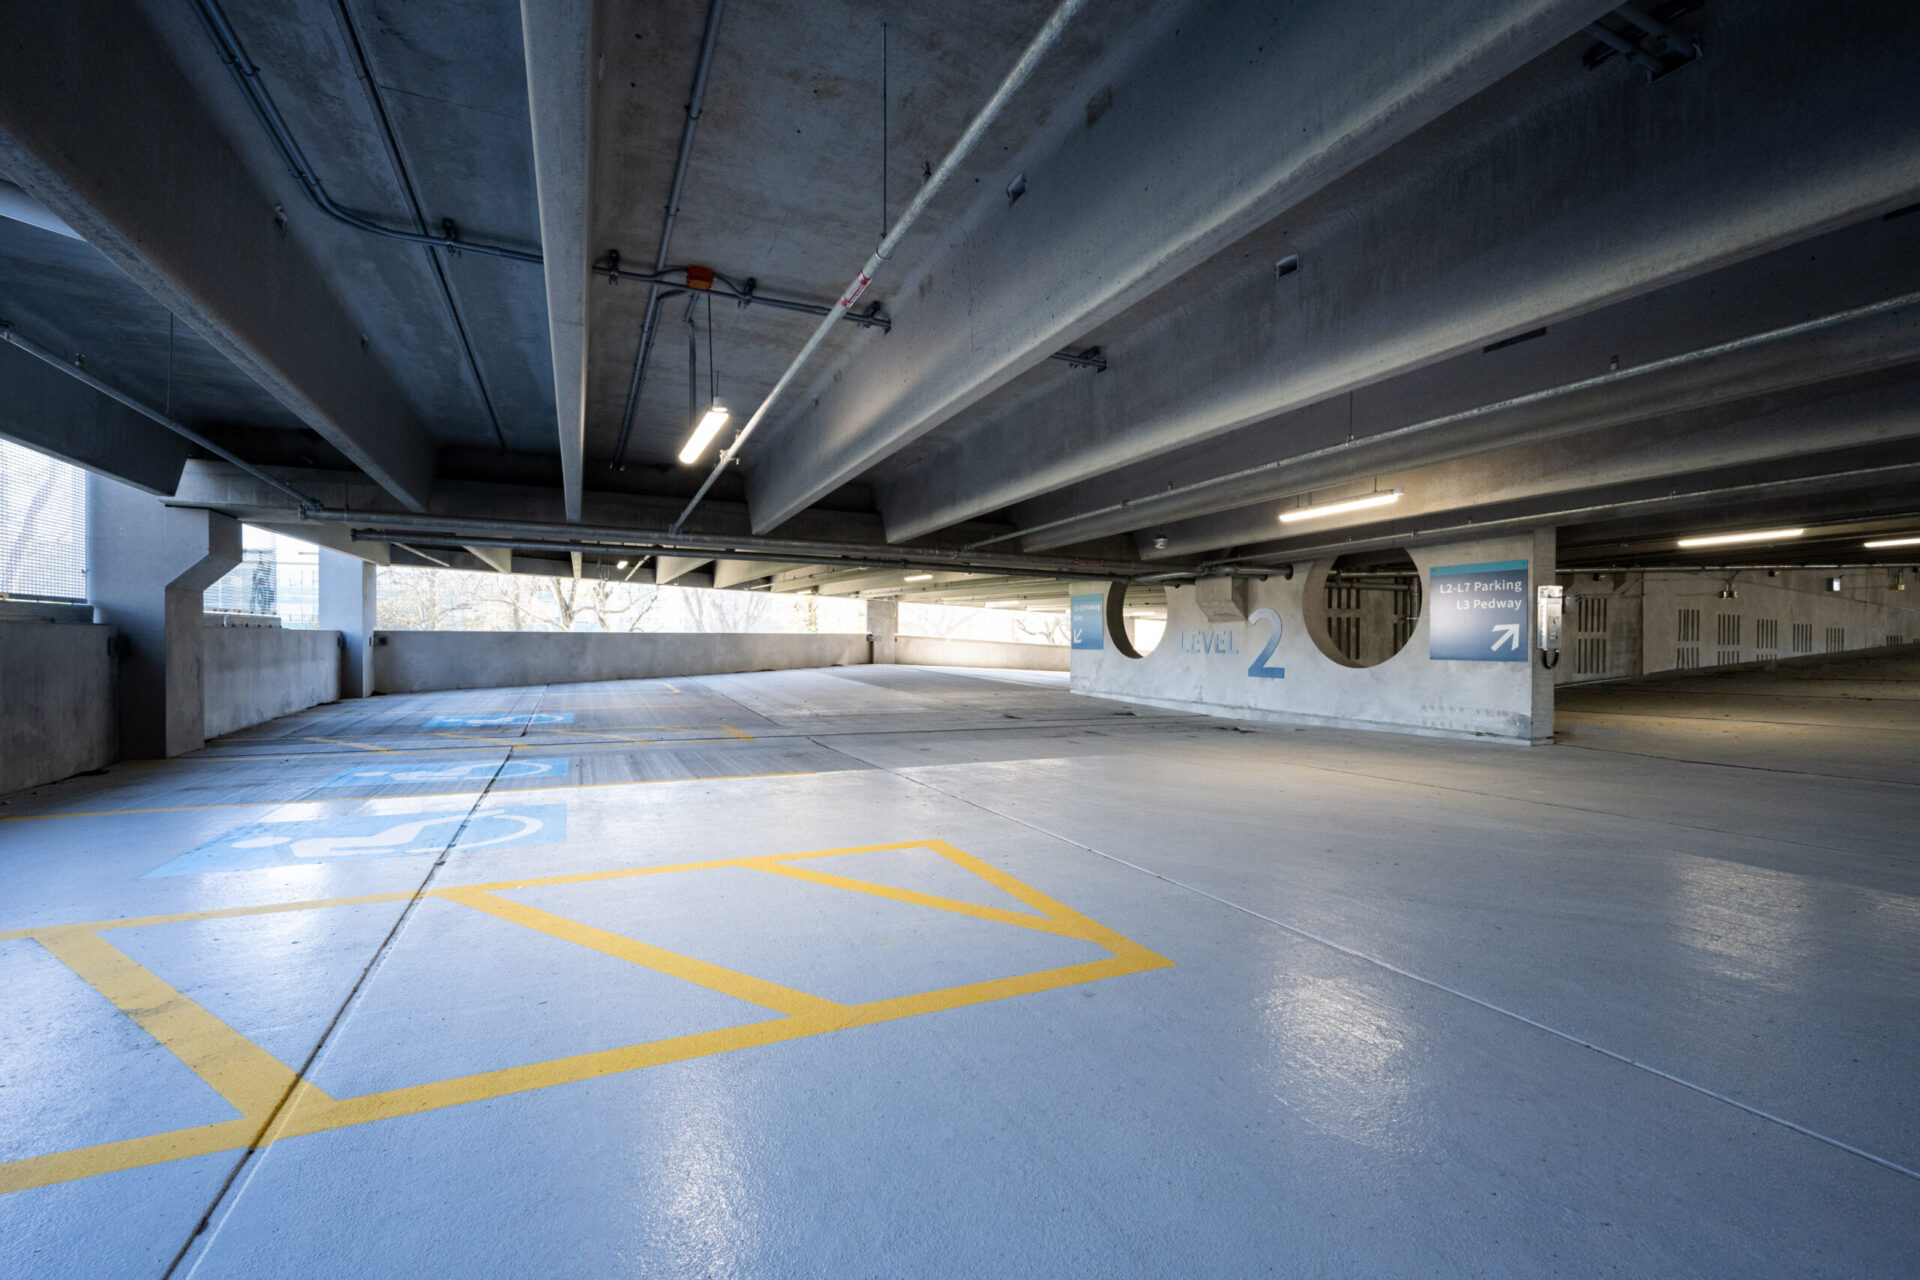 An empty parking garage with yellow lines on the floor showcases architectural design.